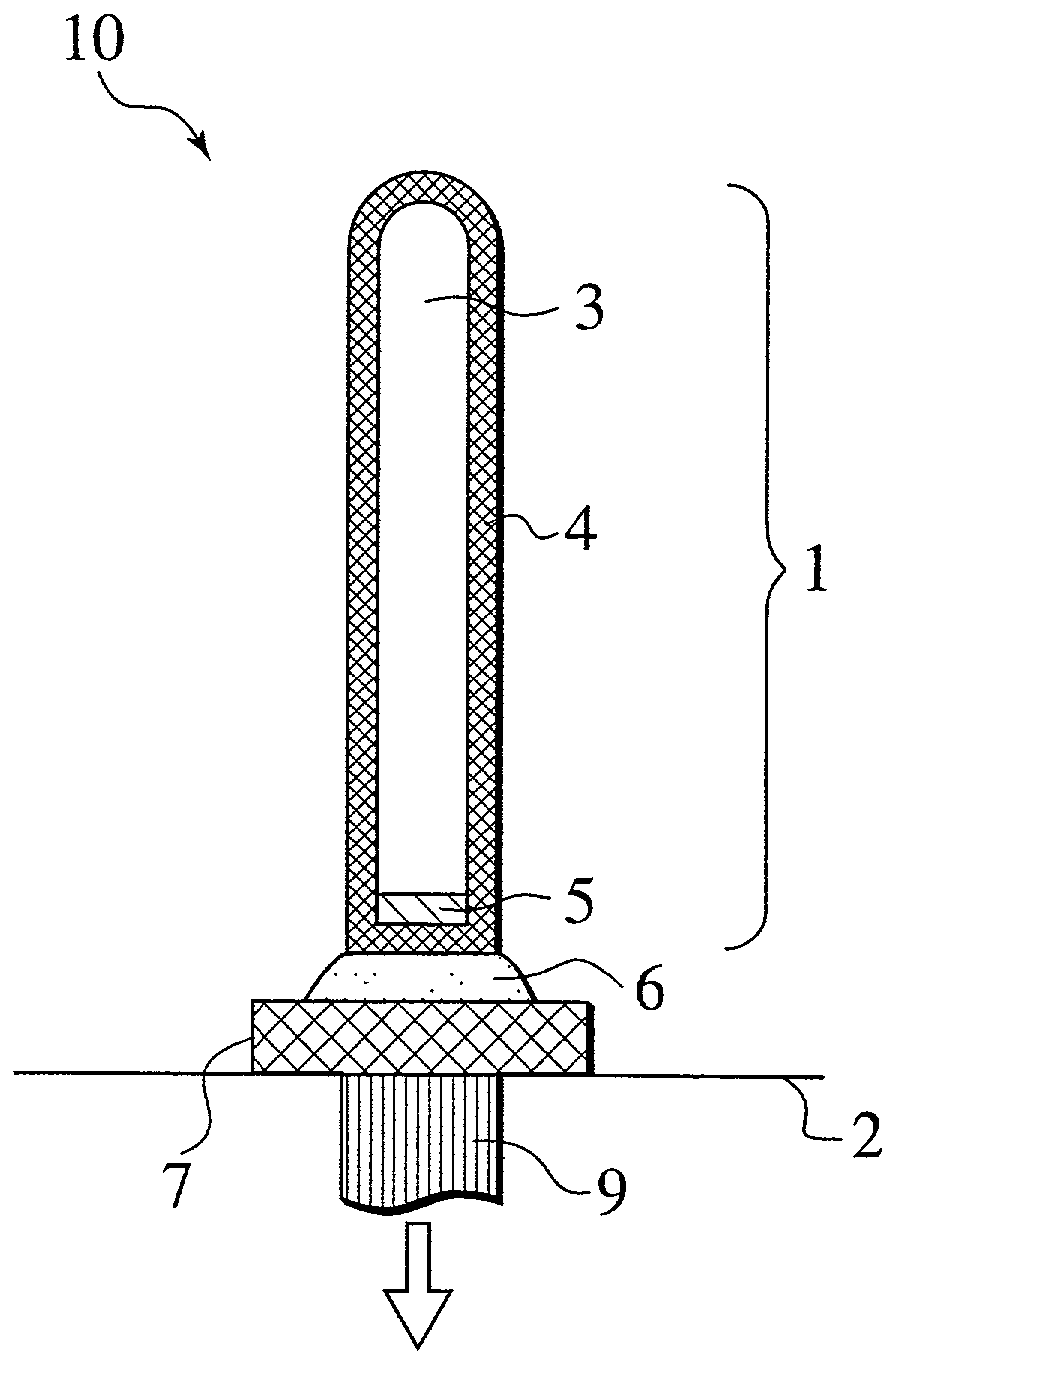 Probe pin for testing electrical characteristics of apparatus, probe card using probe pins